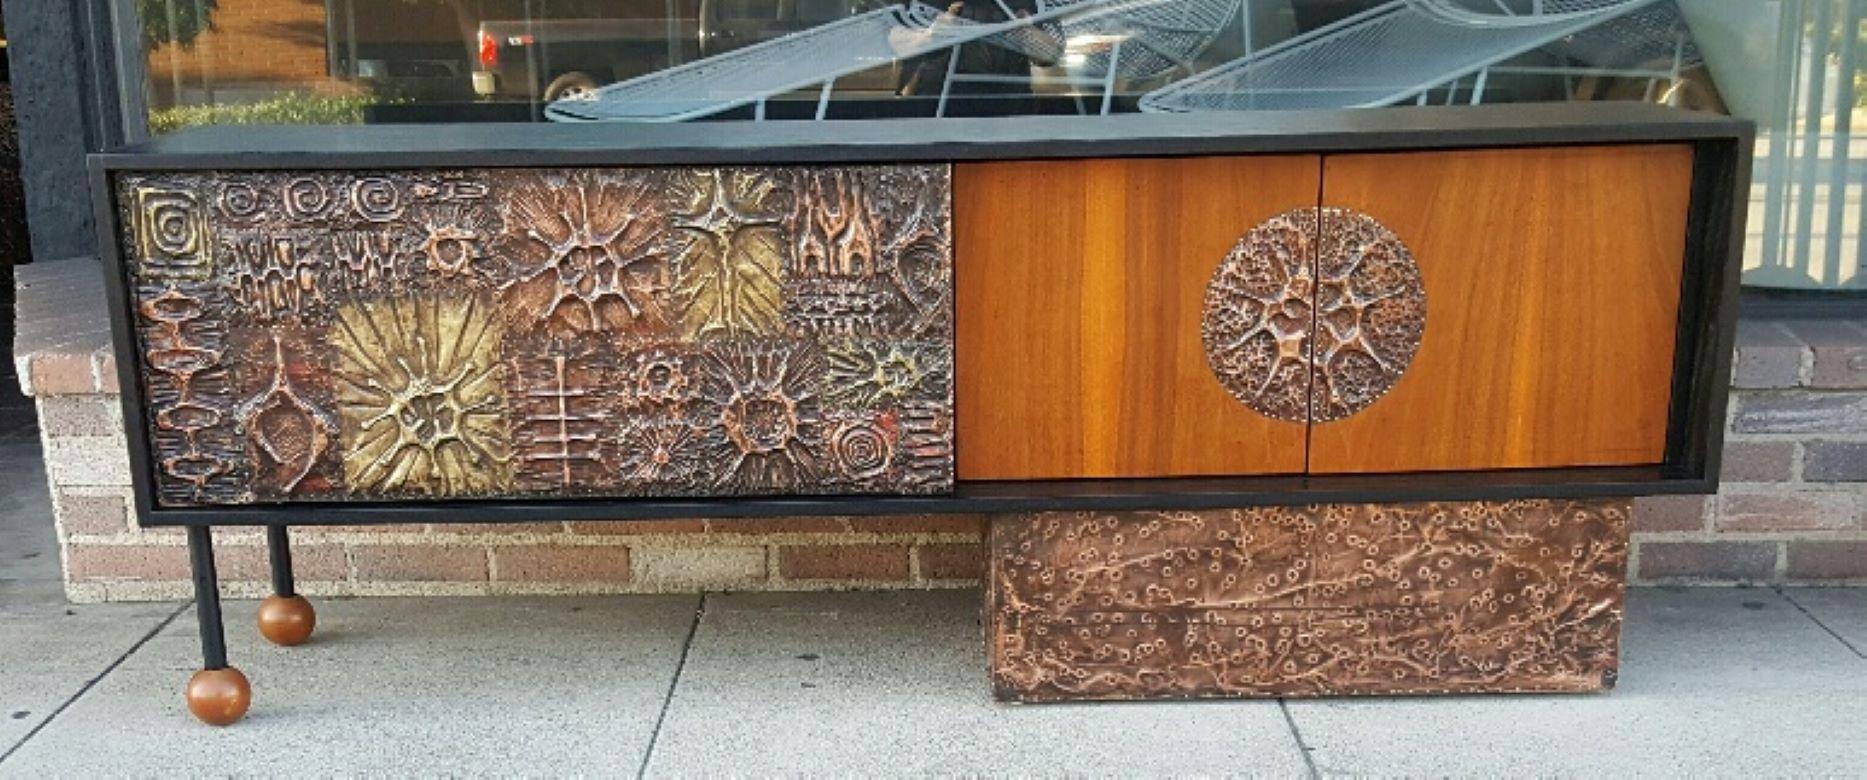 1970 Mid-Century Modern Walnut Credenza with Brutal Copper Tiles by Lou Ramirez 13